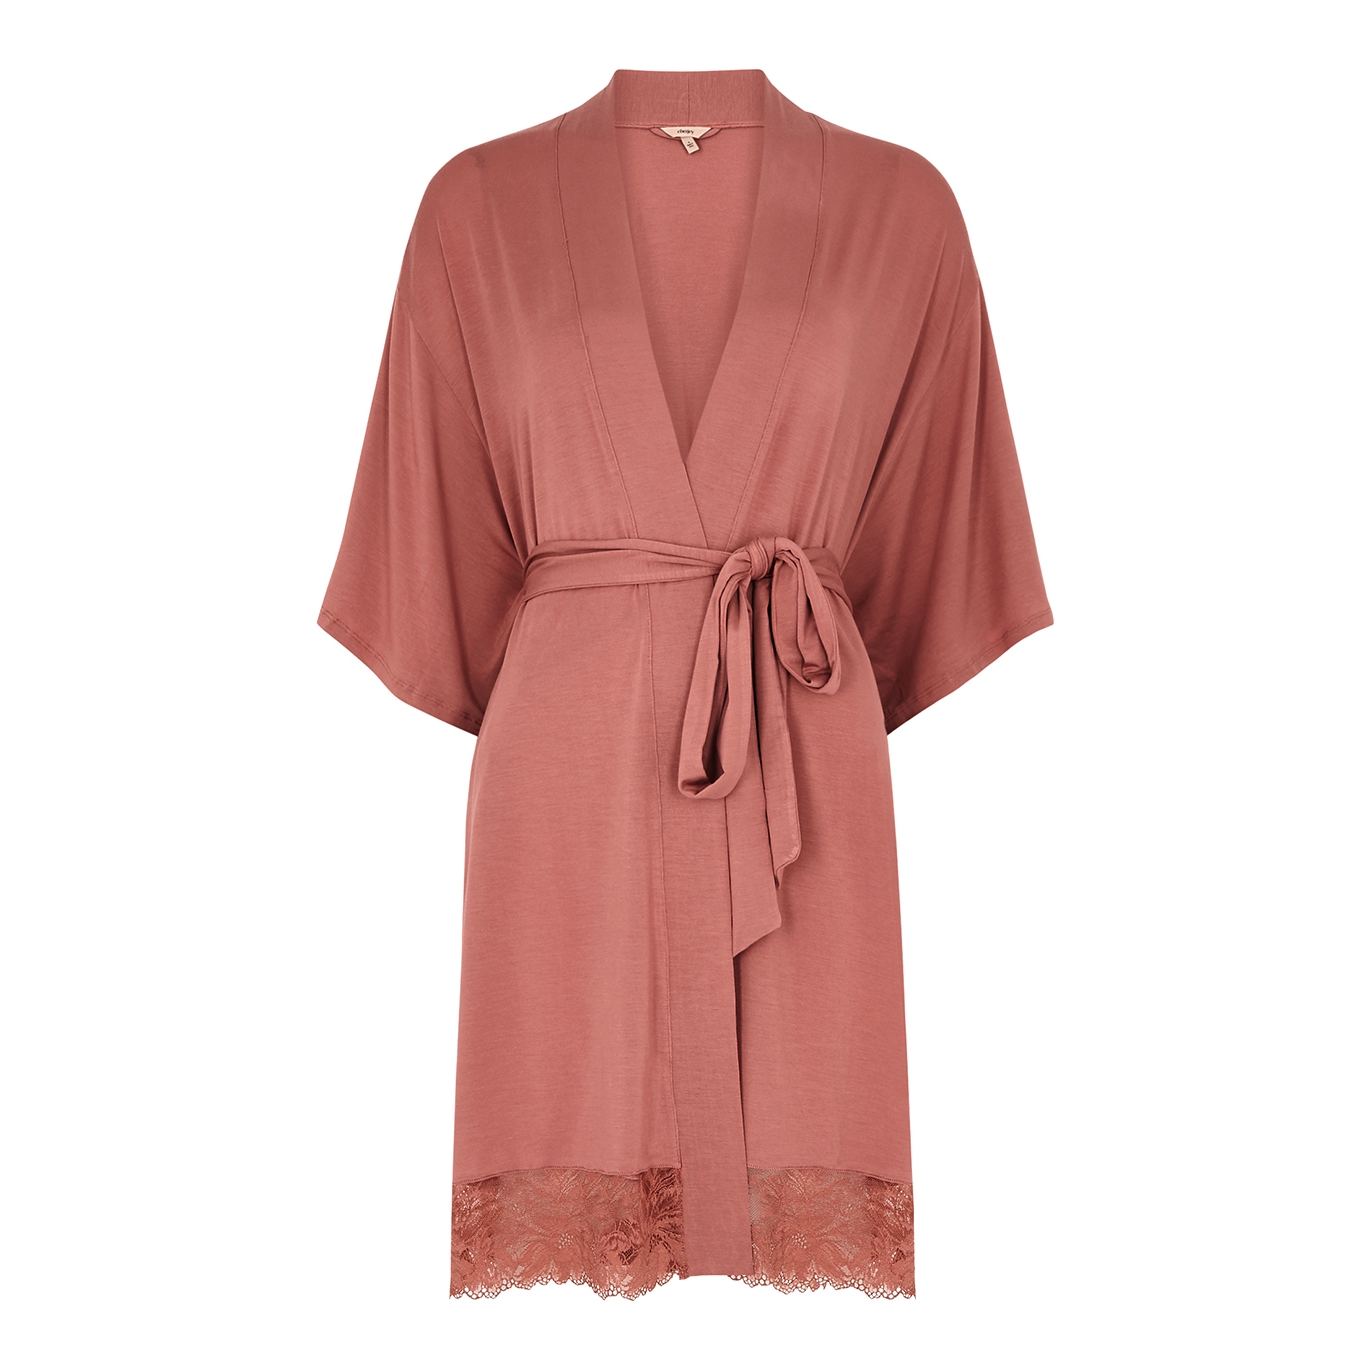 EBERJEY ROSALIA LACE-TRIMMED STRETCH-JERSEY dressing gown